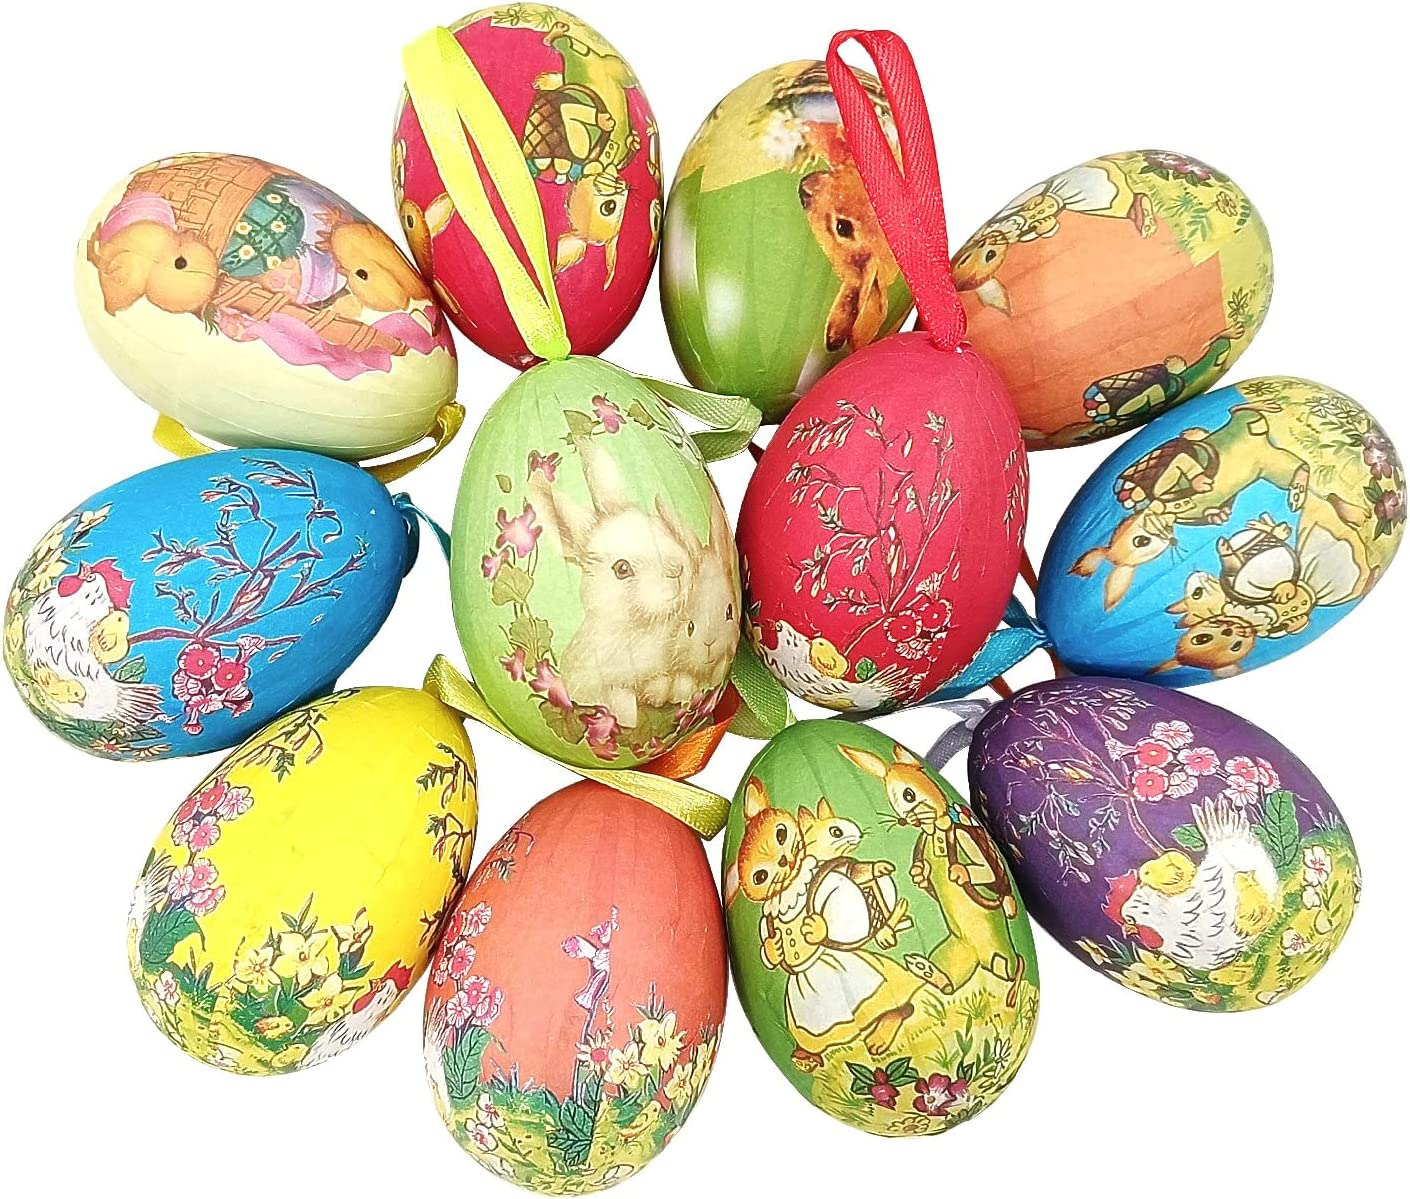 Vintage Easter Eggs Hanging Ornaments Spring Holiday Home Paper Mache Tree Decor